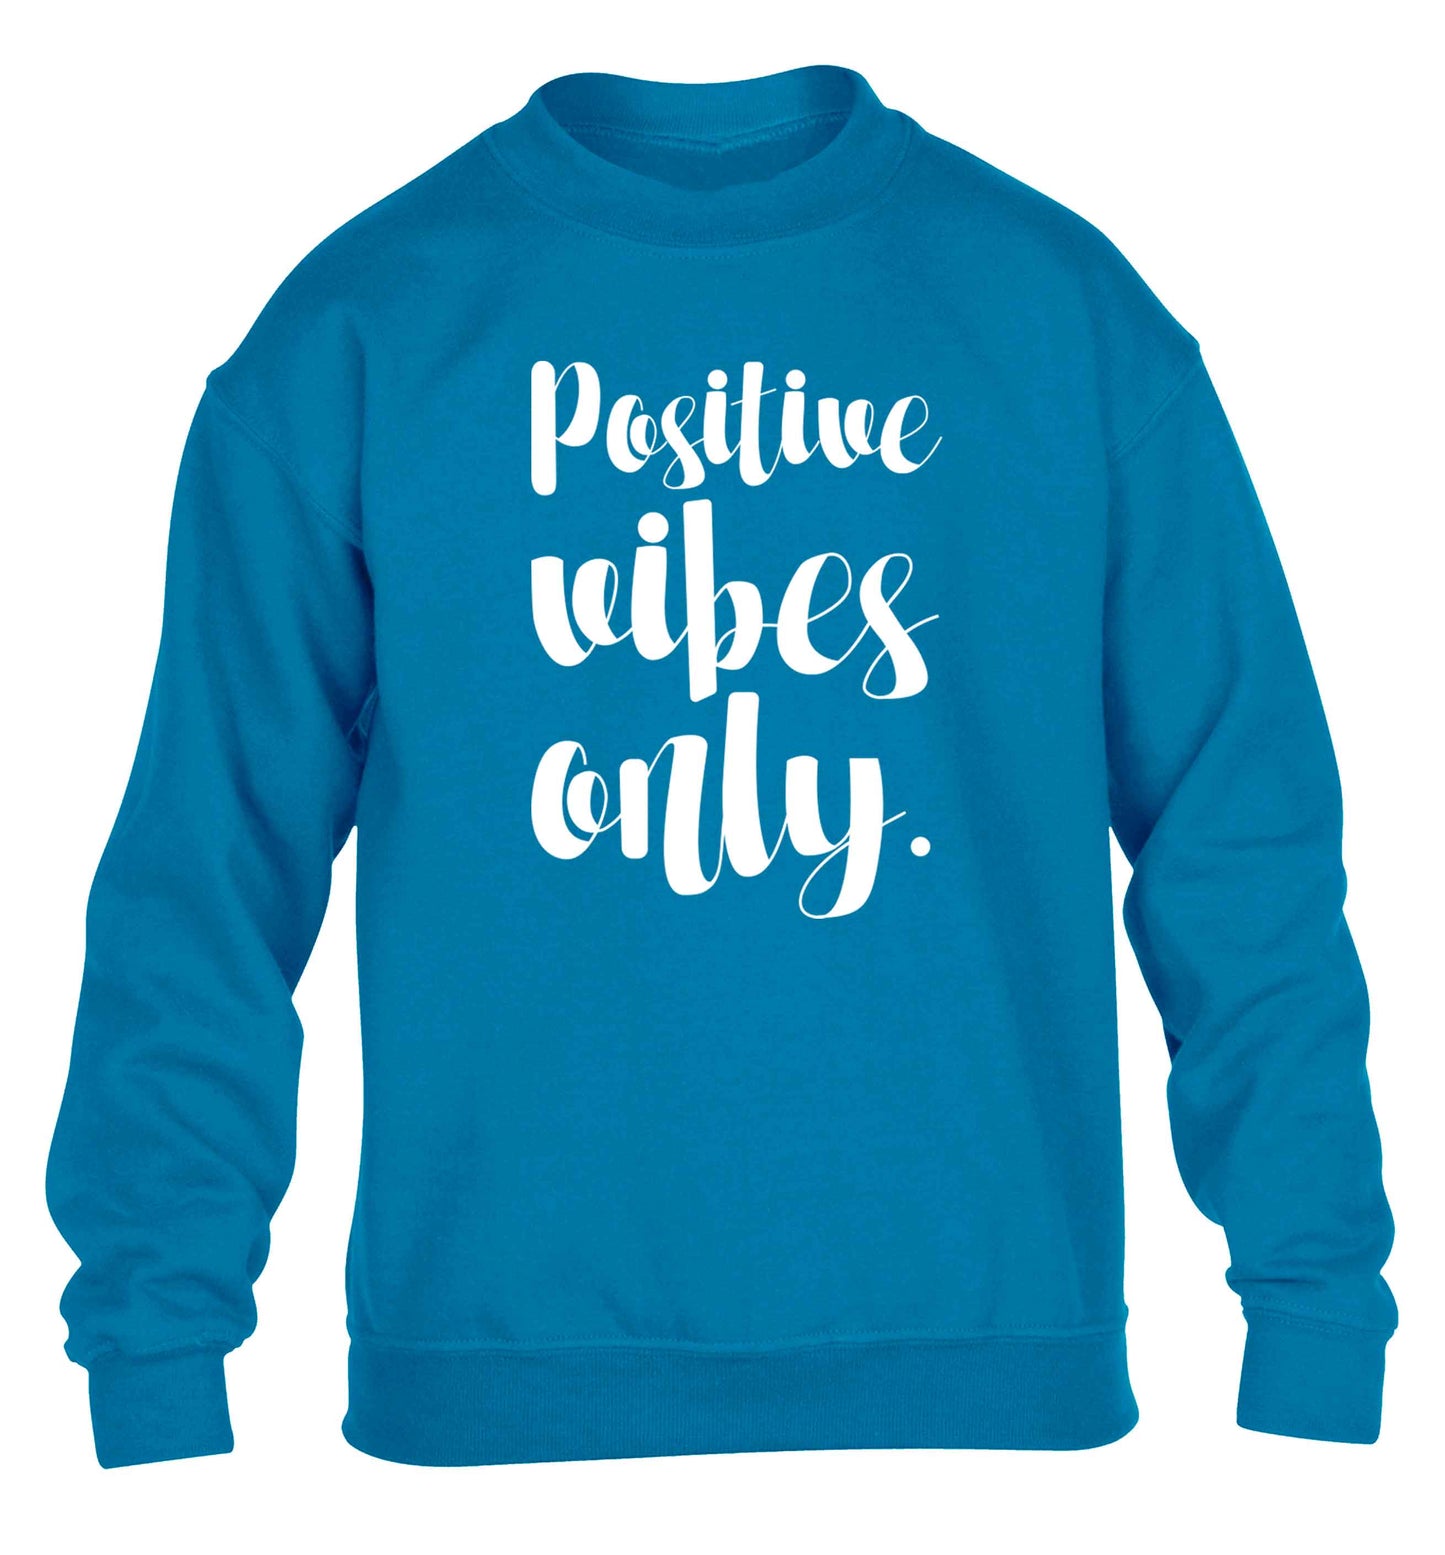 Positive vibes only children's blue sweater 12-13 Years